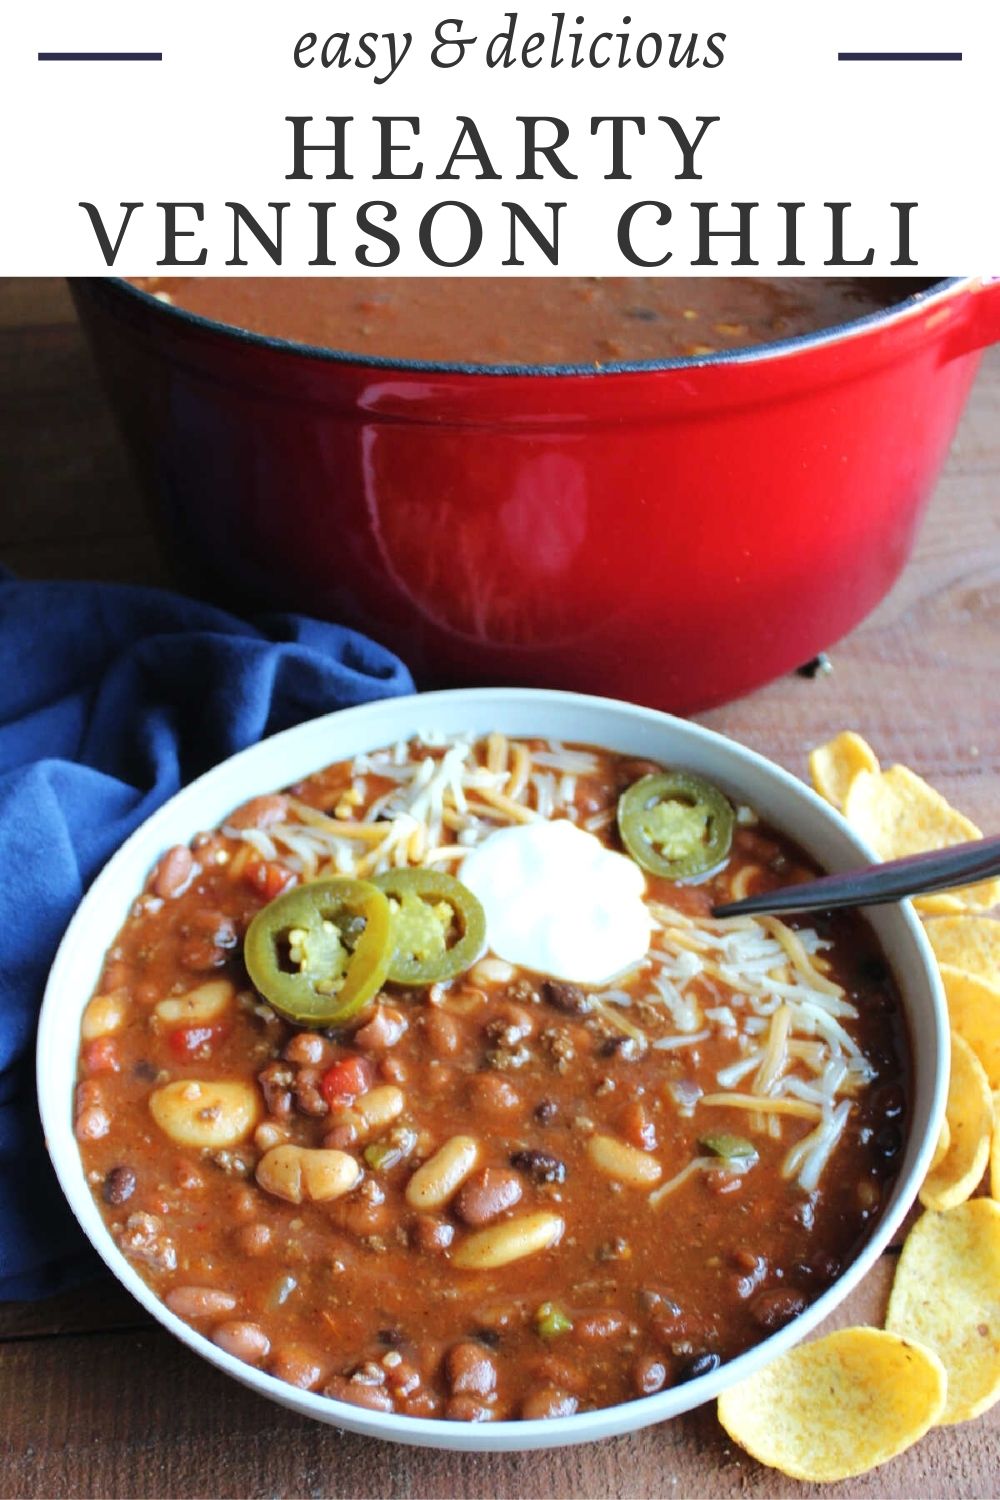 This hearty venison chili recipe is loaded with ground venison, lots of beans and big flavor. The best part is it is really simple to put together and the leftovers are every bit as good if not better than the first bowl.